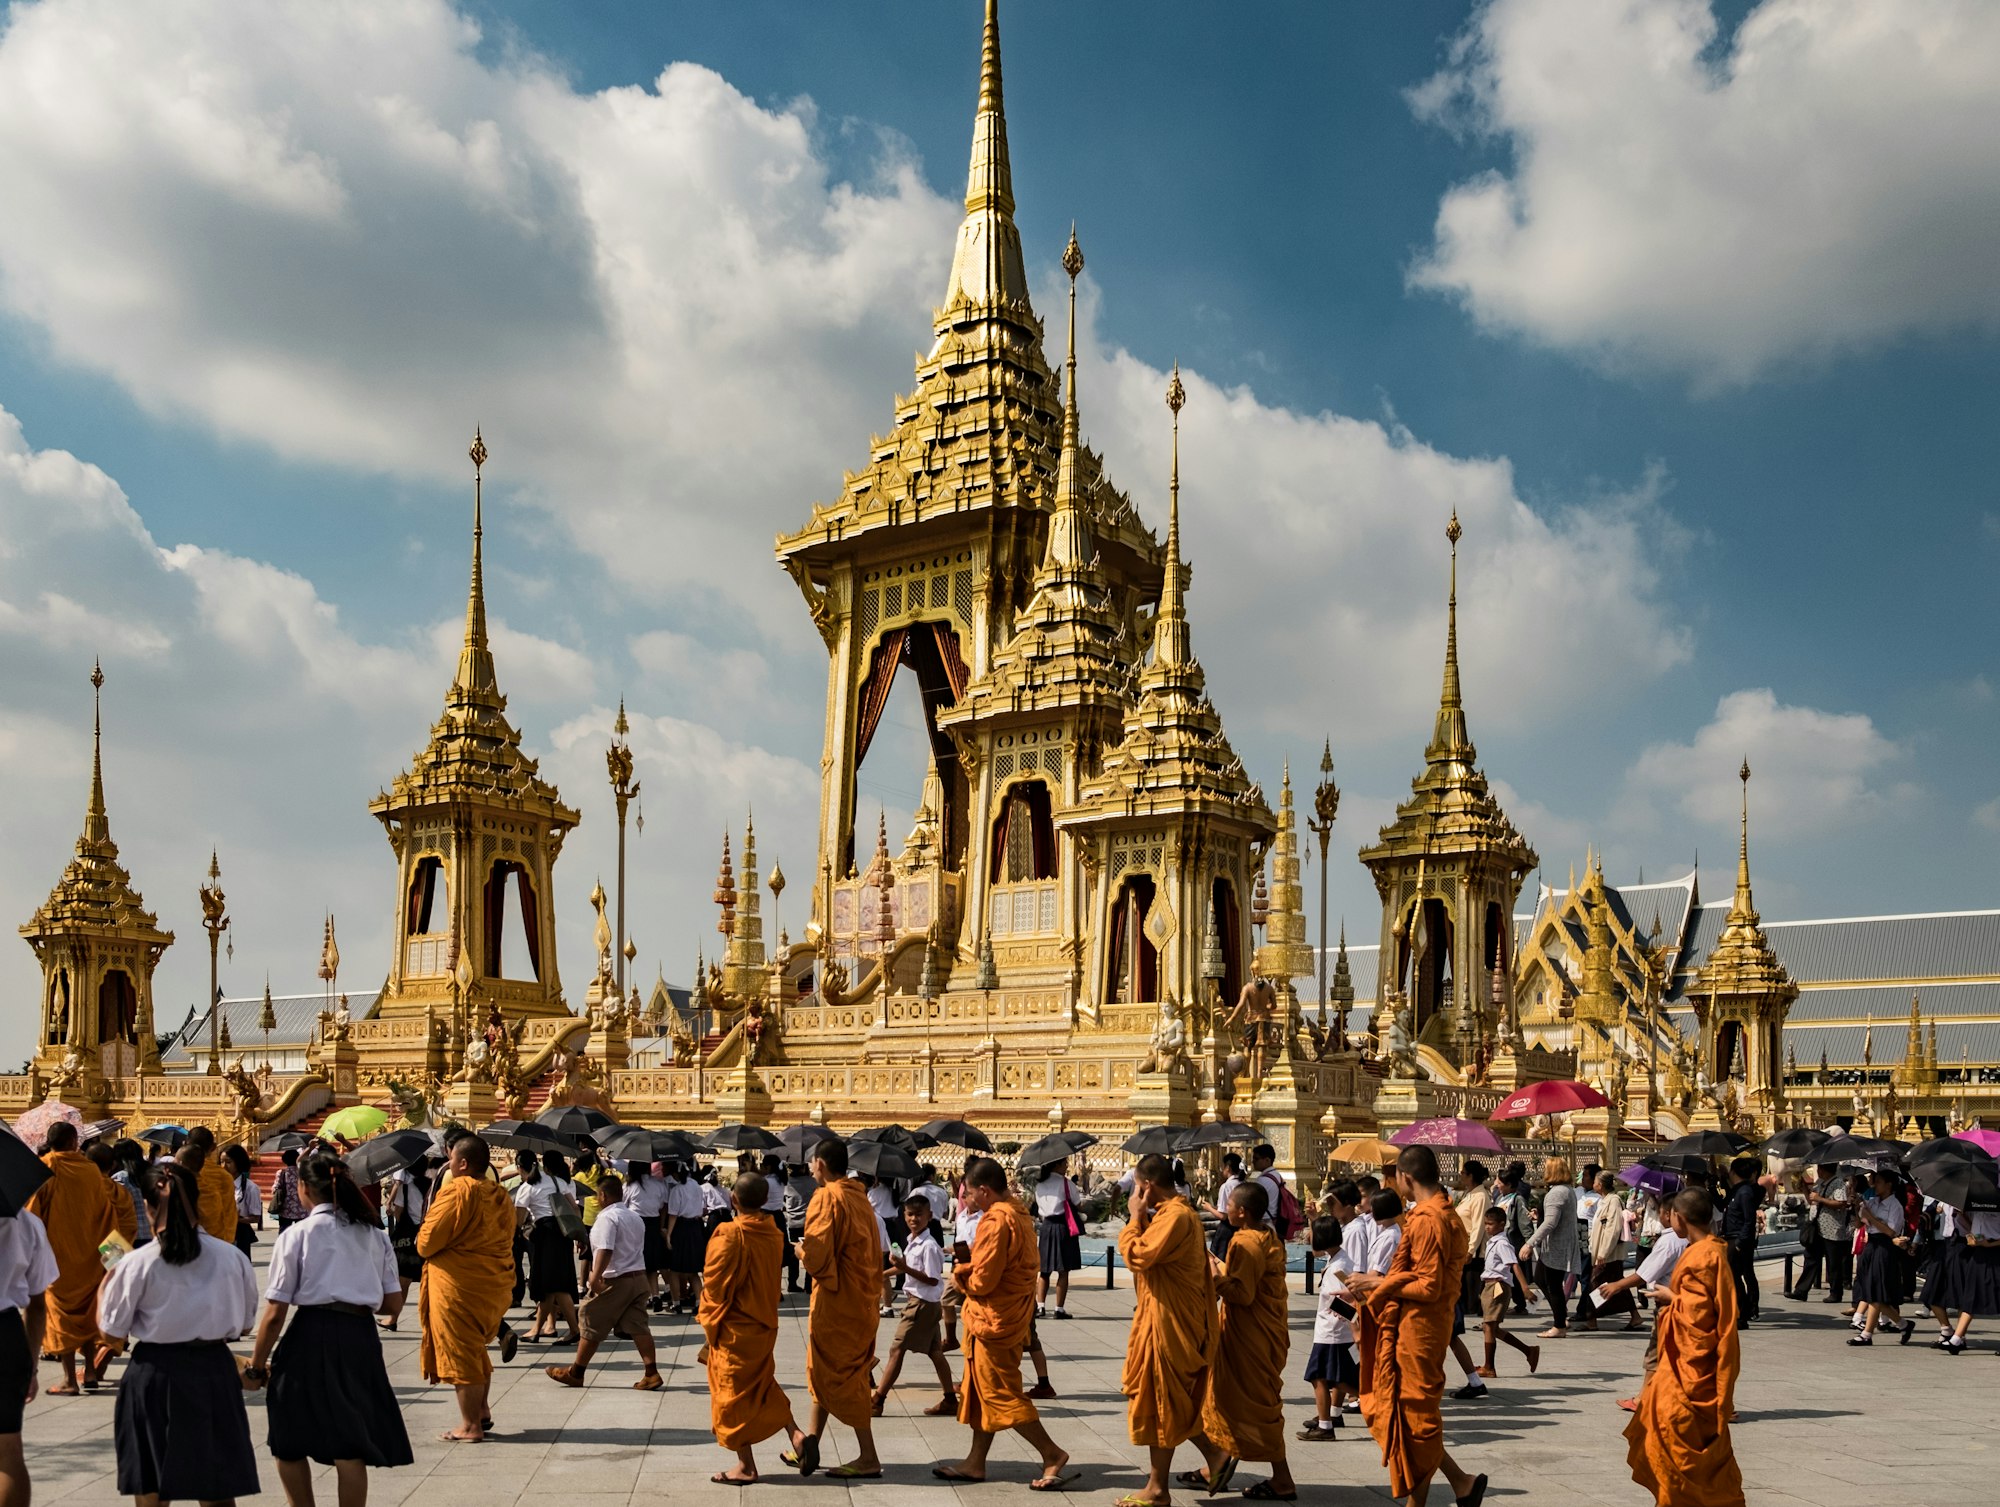 A group of monks walk around the Grand Palace in Bangkok during the mid-day sun.